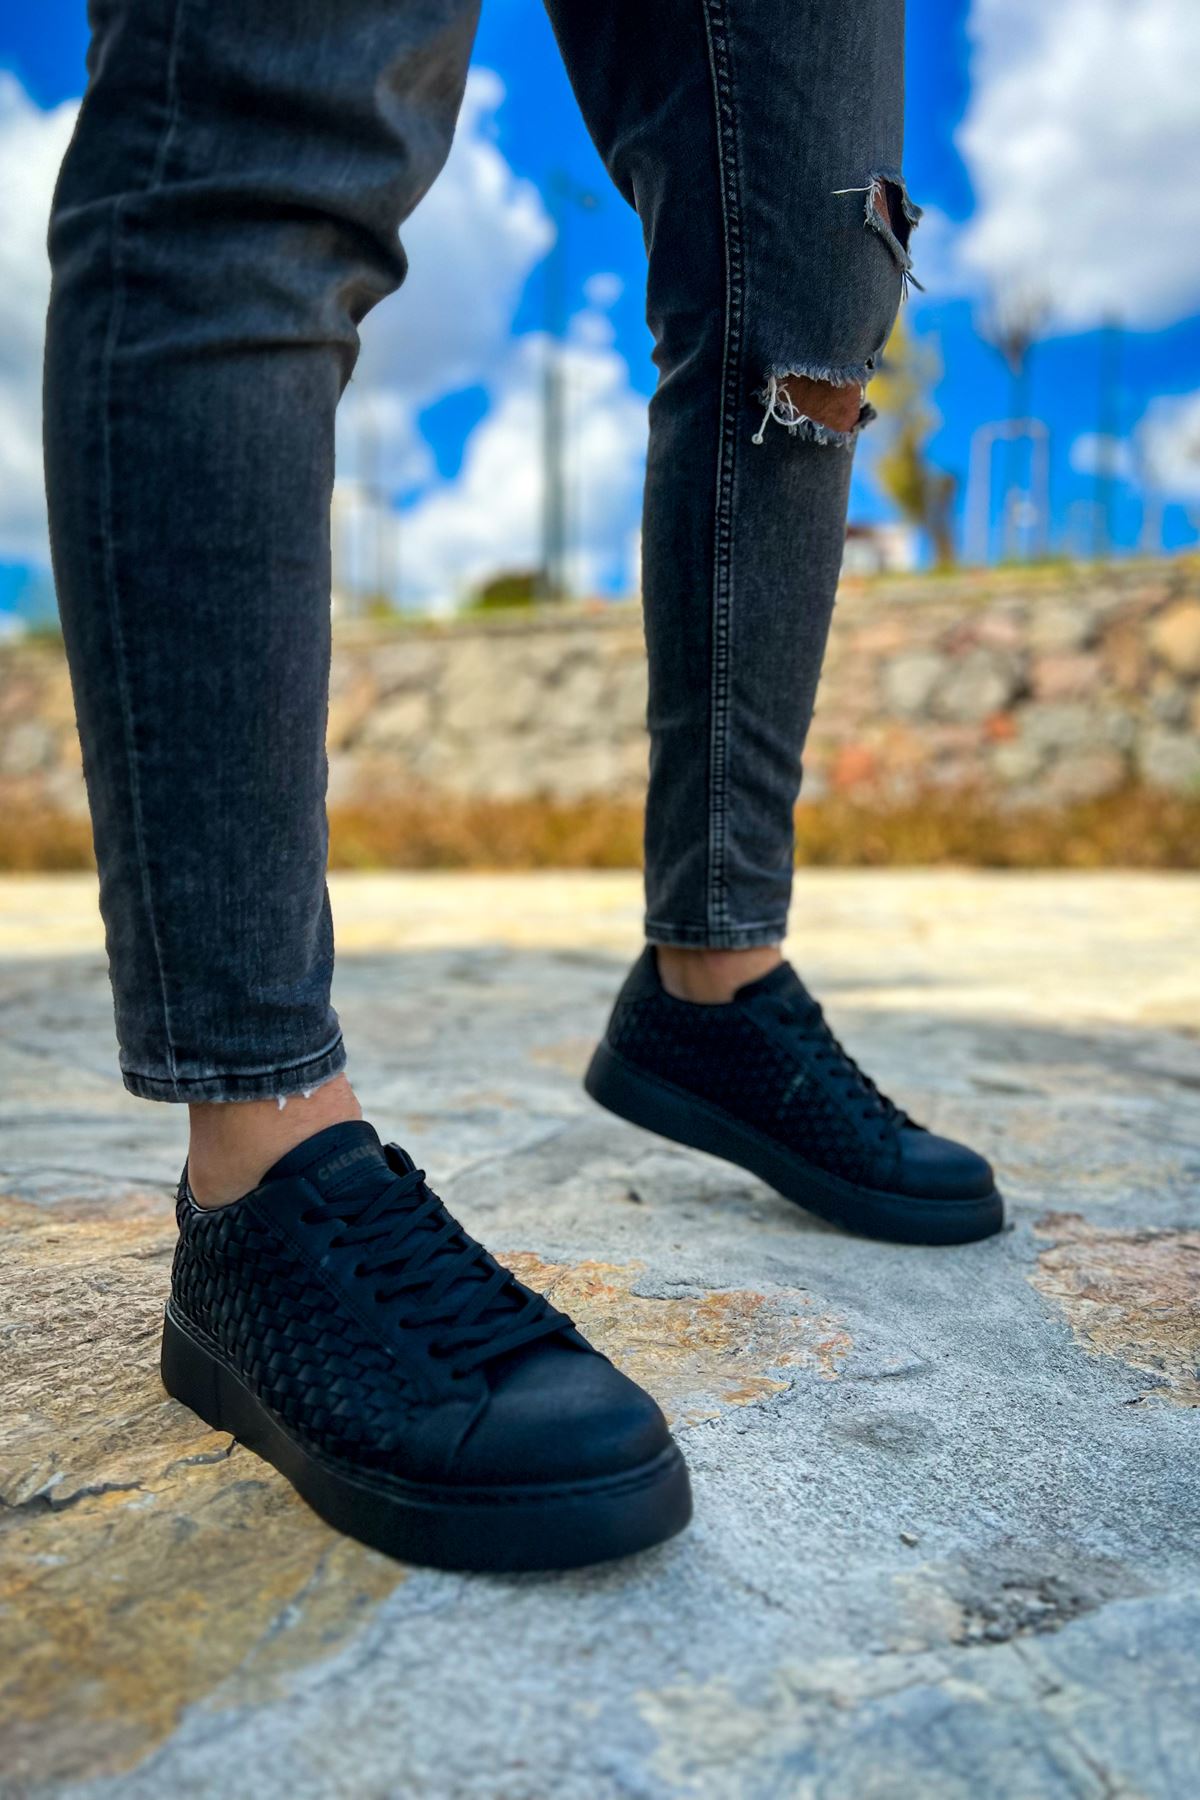 CH203 OST Maglieria Men's Sneakers Shoes BLACK - STREETMODE ™